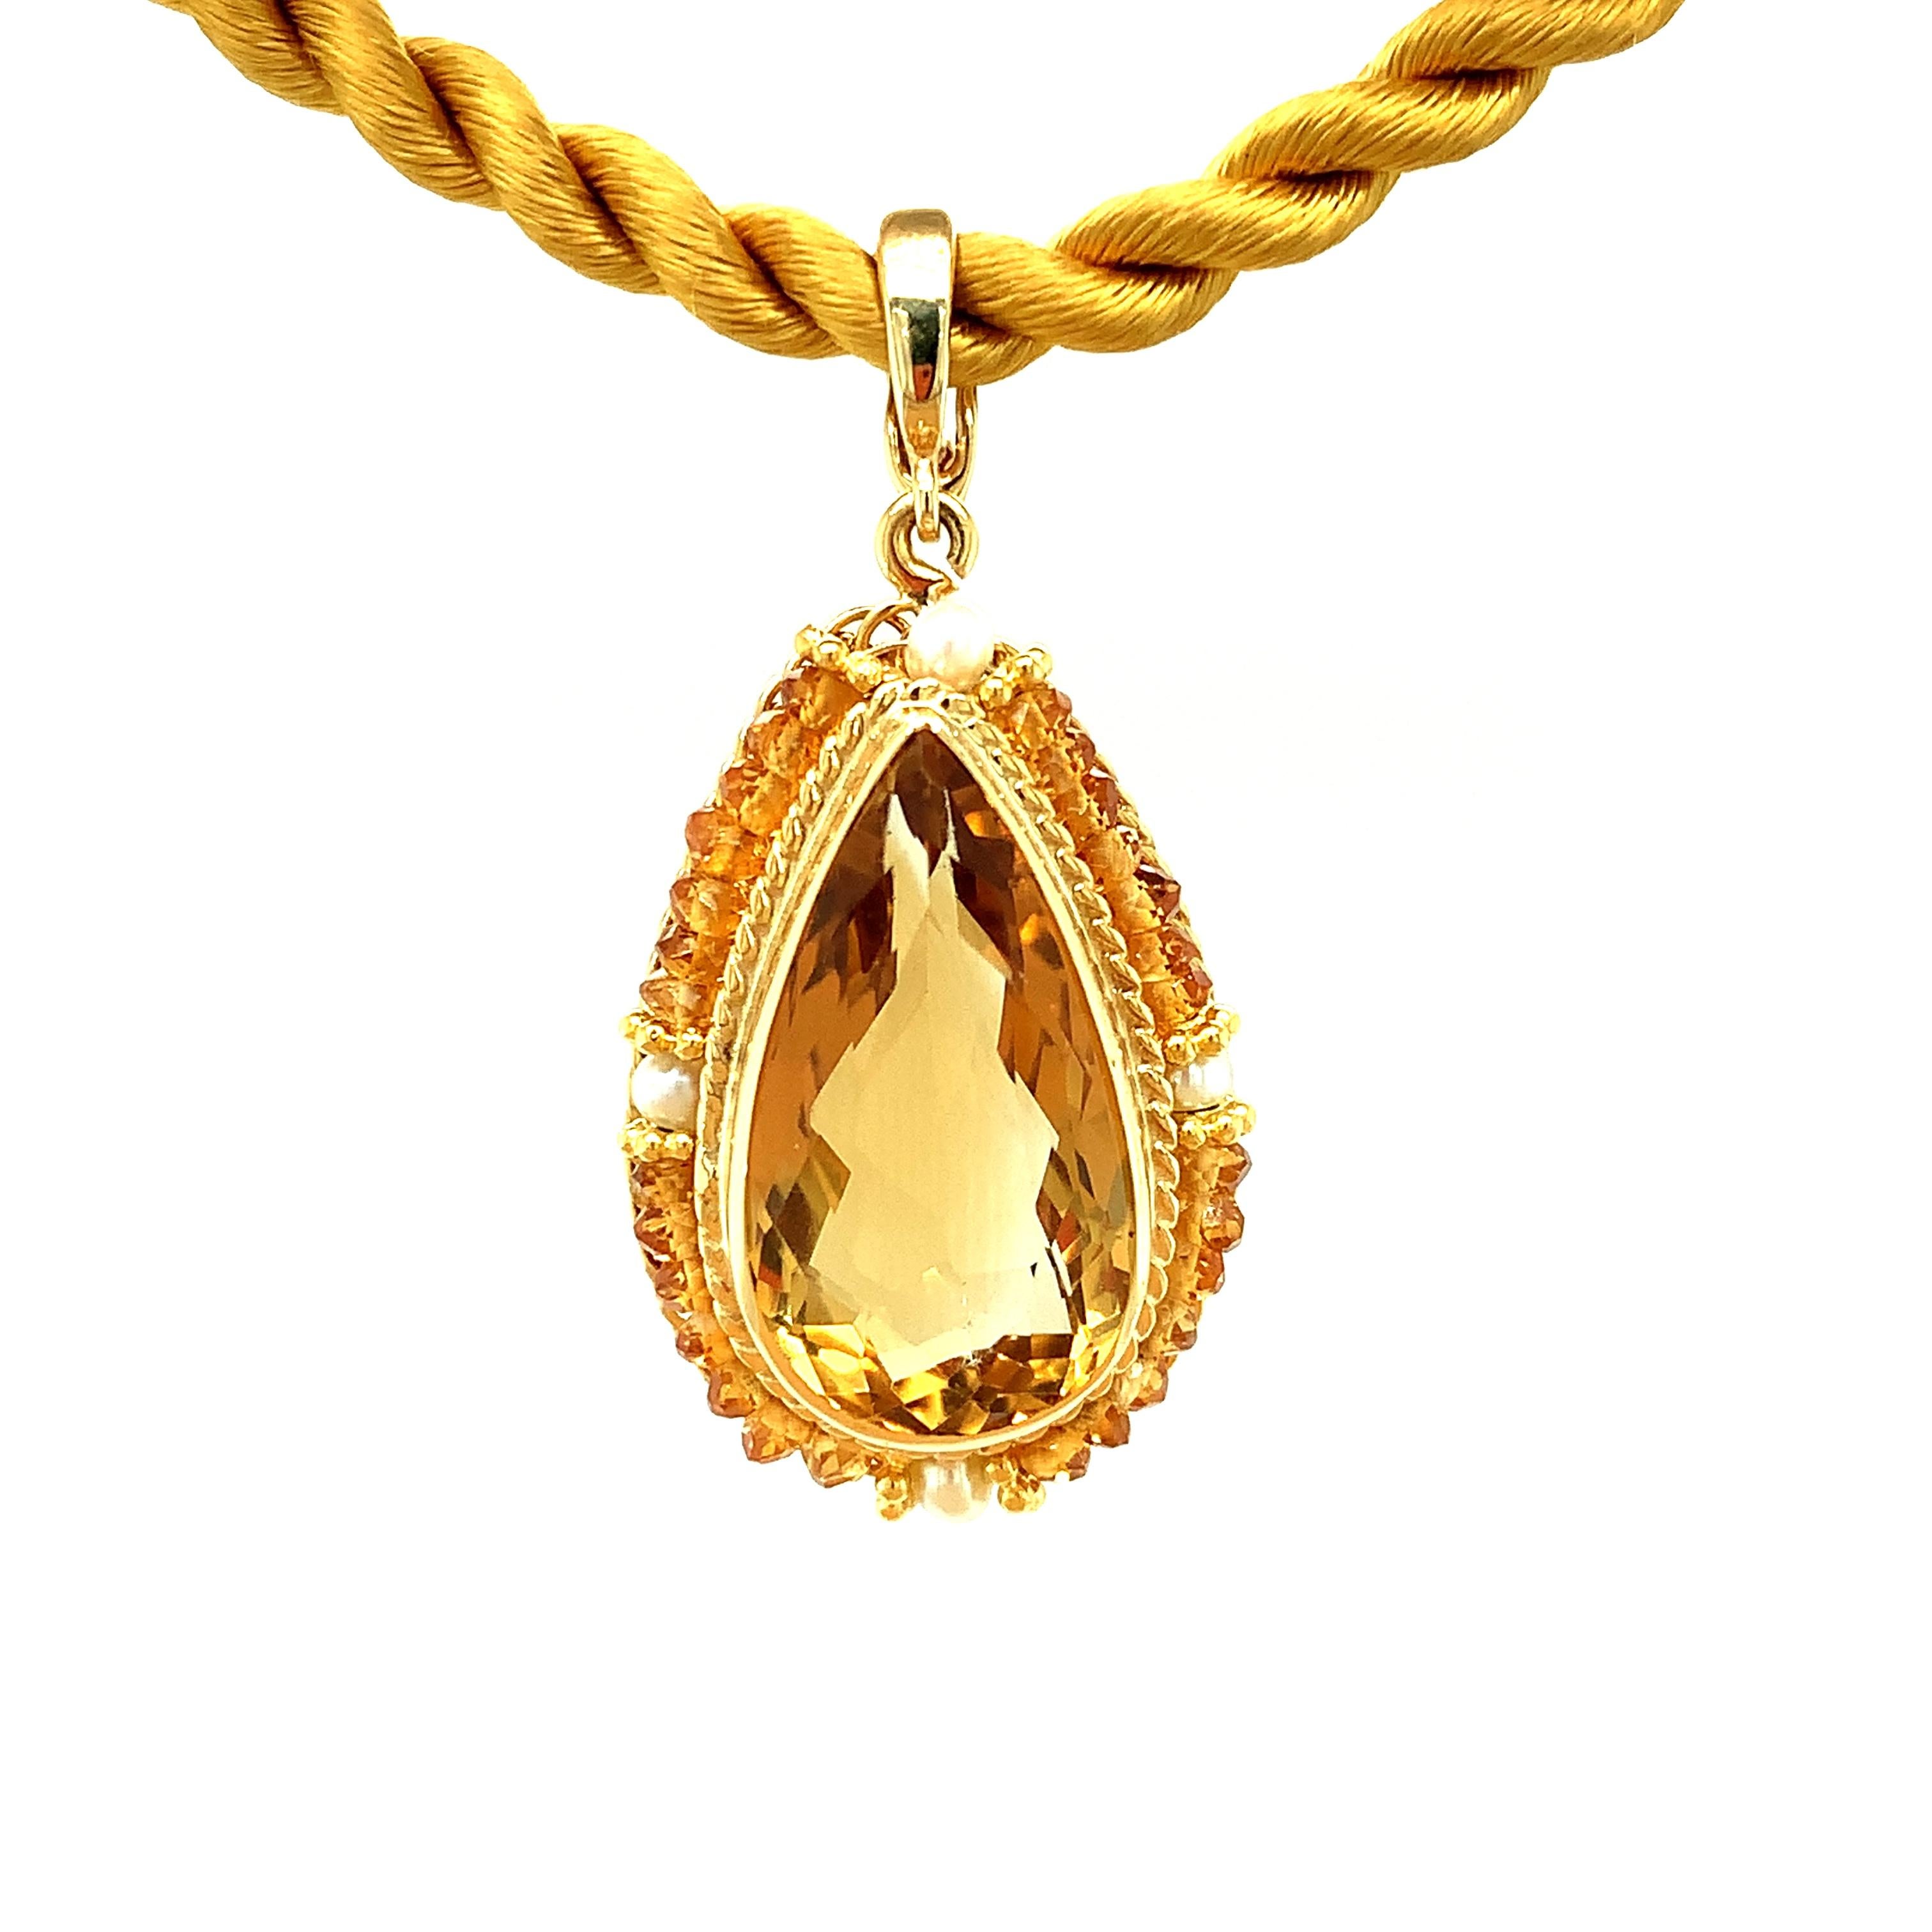 Brighten your day with this handmade 18k yellow gold pendant featuring a large, sparkling golden citrine! The 12.48 carat center pear shape is surrounded with seeds pearls, citrine beads and delicate 18k yellow gold spacers that have been hand